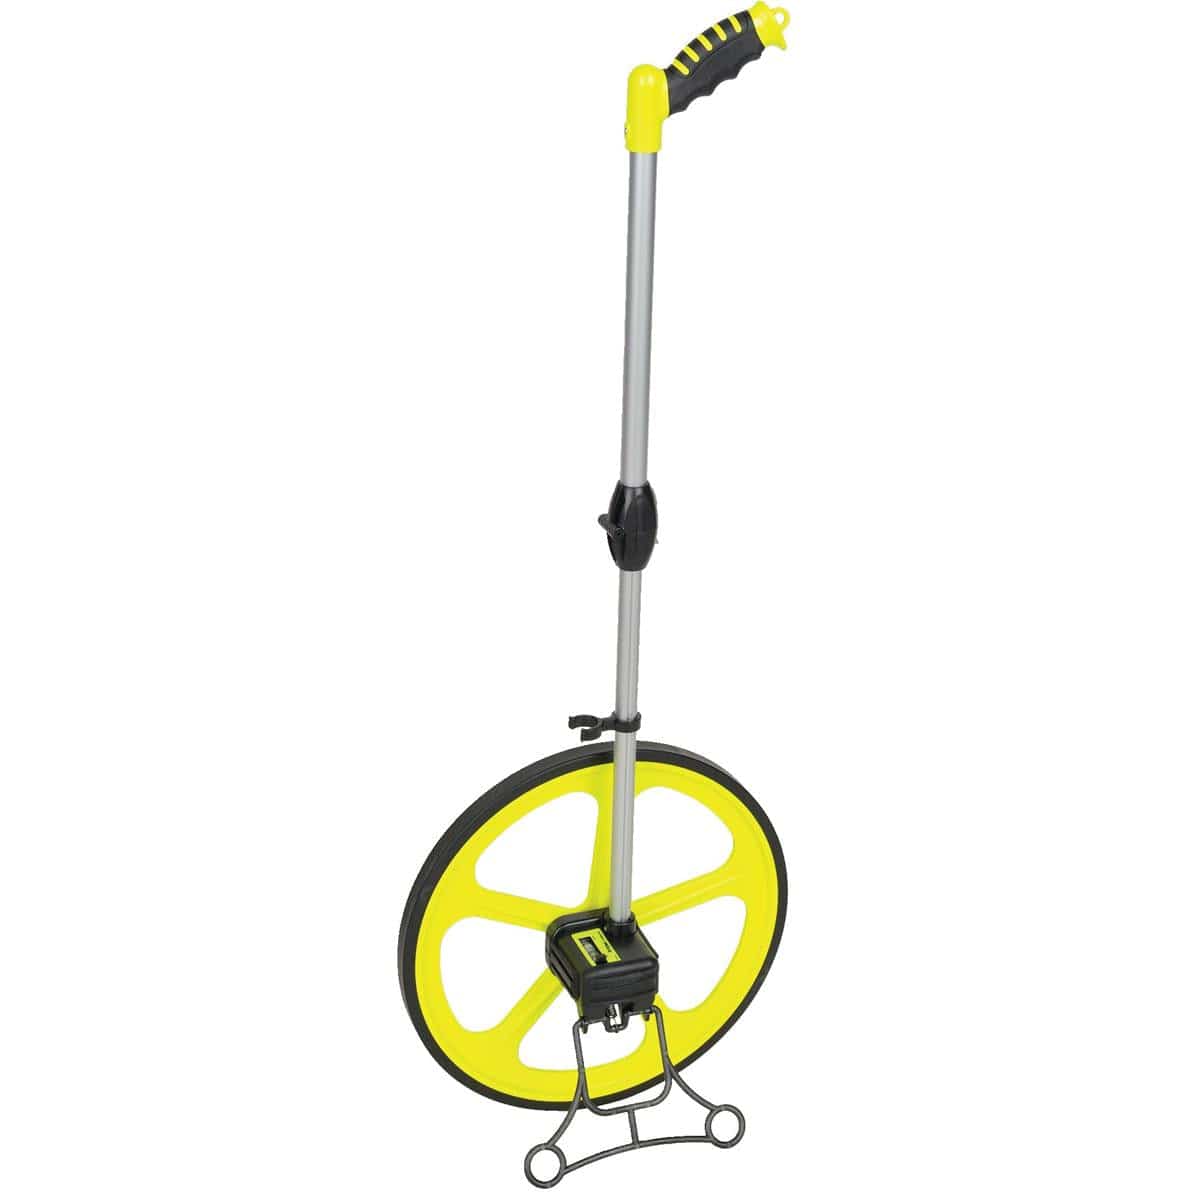 Series 45 High-Visibility Measuring Wheel | Gemplers